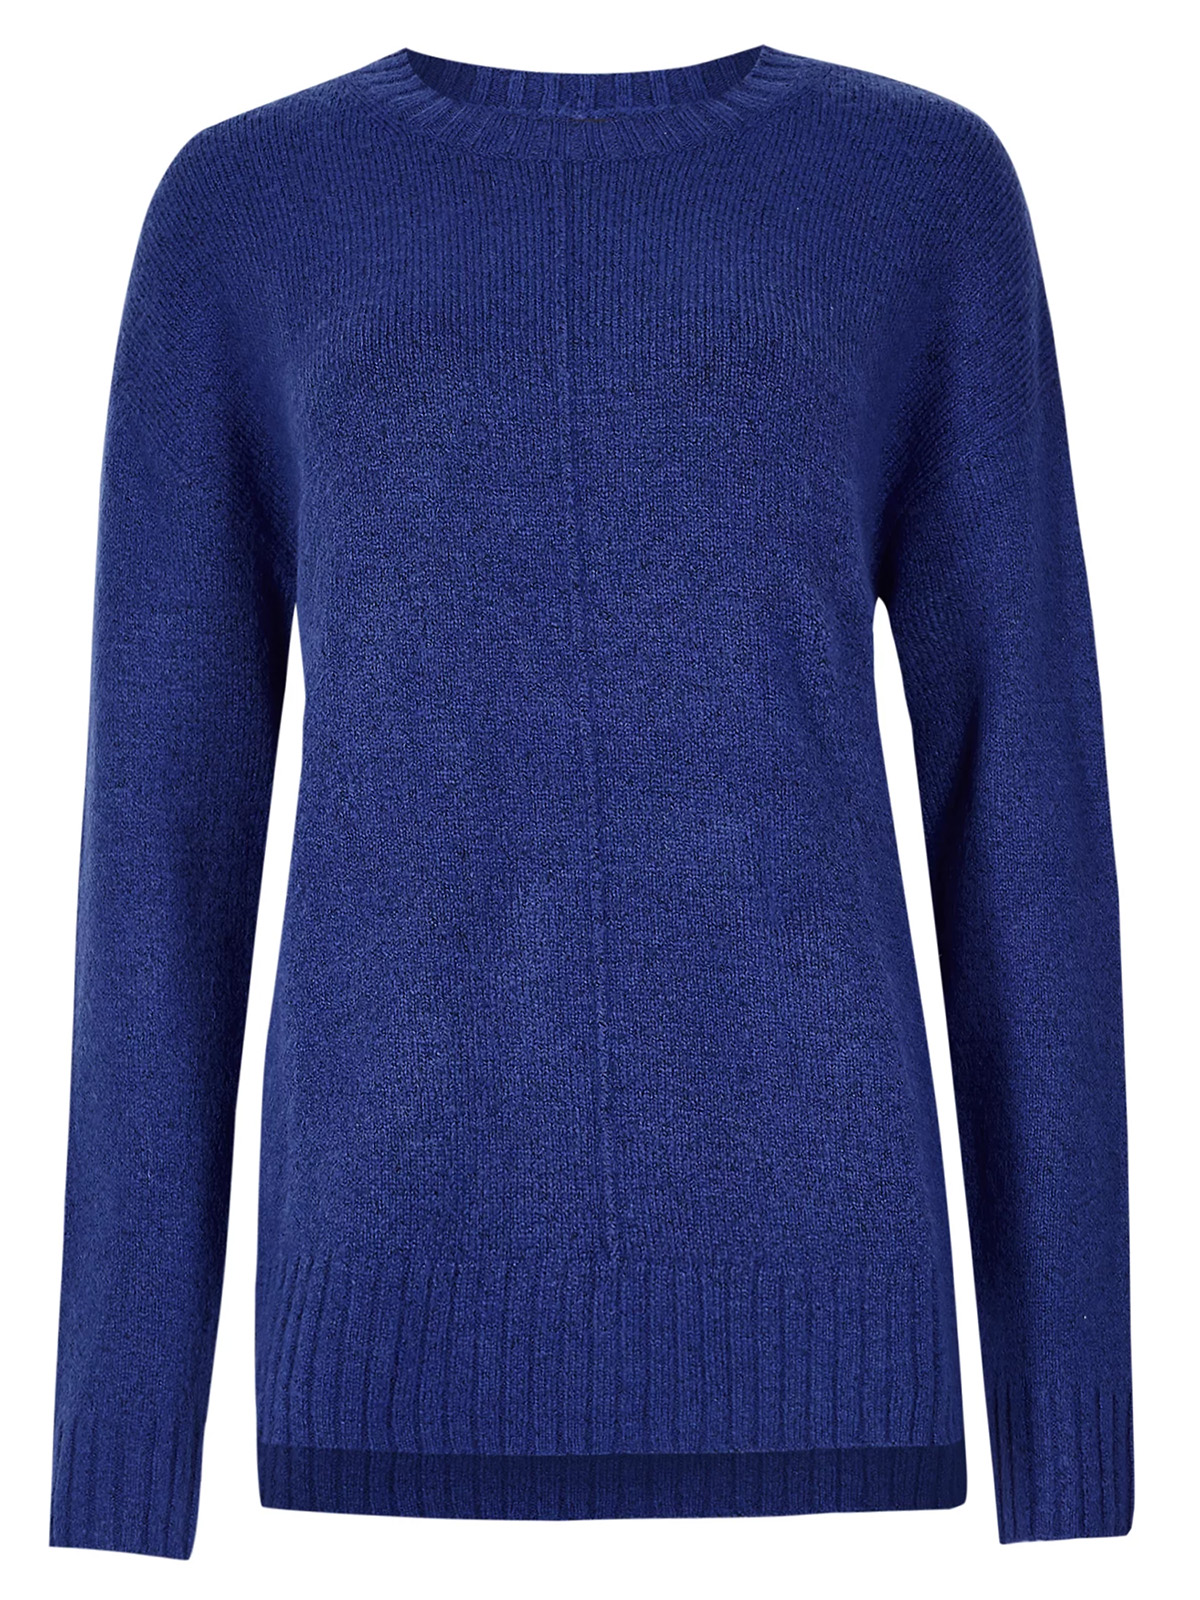 Marks and Spencer - - M&5 ULTRAVIOLET Relaxed Supersoft Round Neck ...